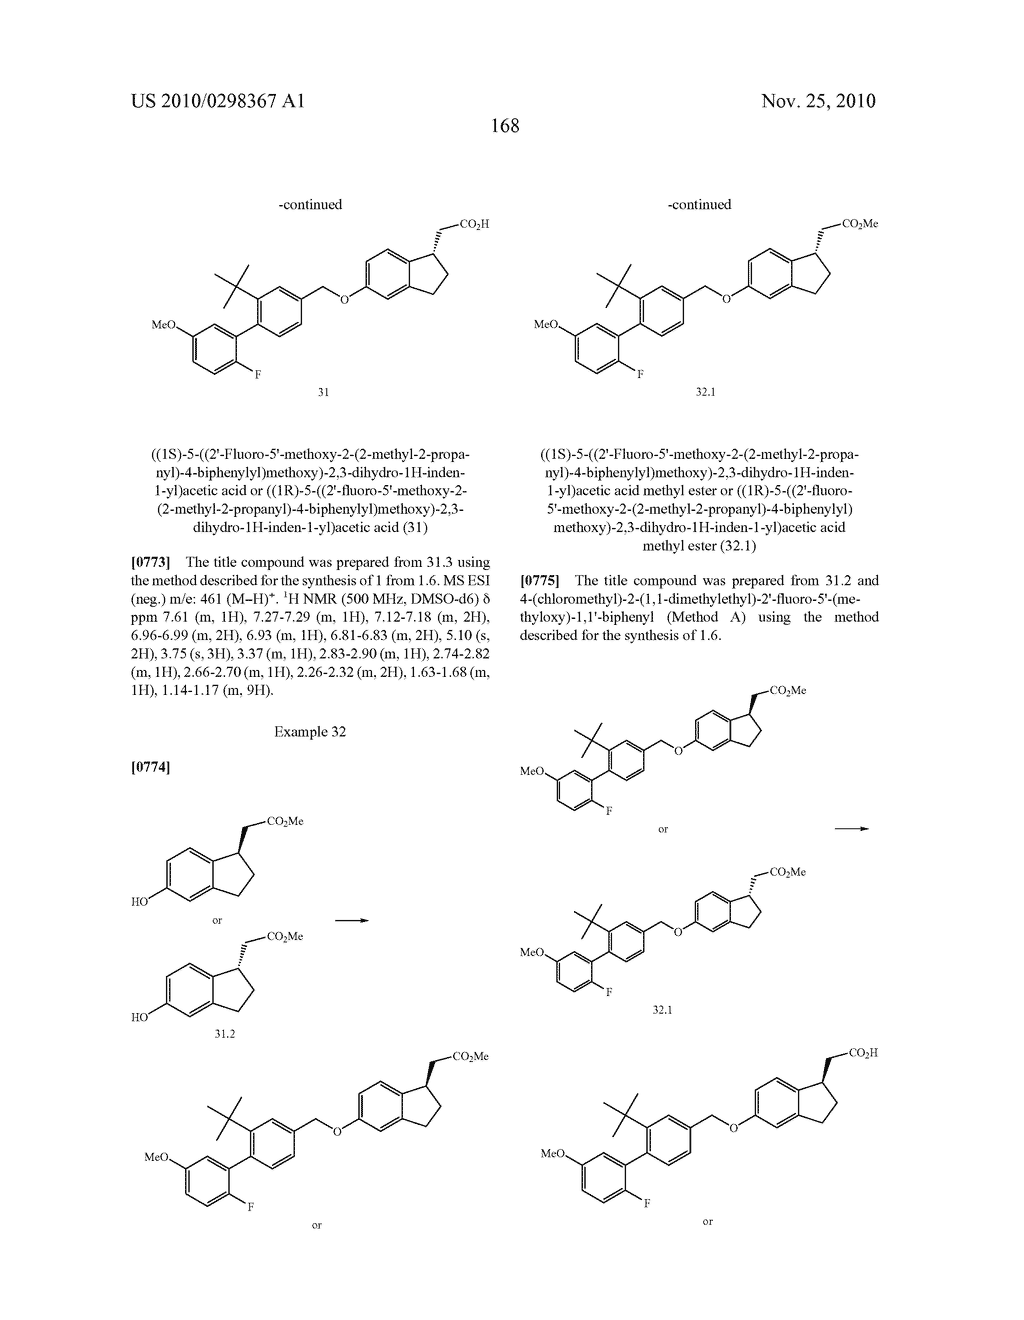 Conformationally Constrained Carboxylic Acid Derivatives Useful for Treating Metabolic Disorders - diagram, schematic, and image 170